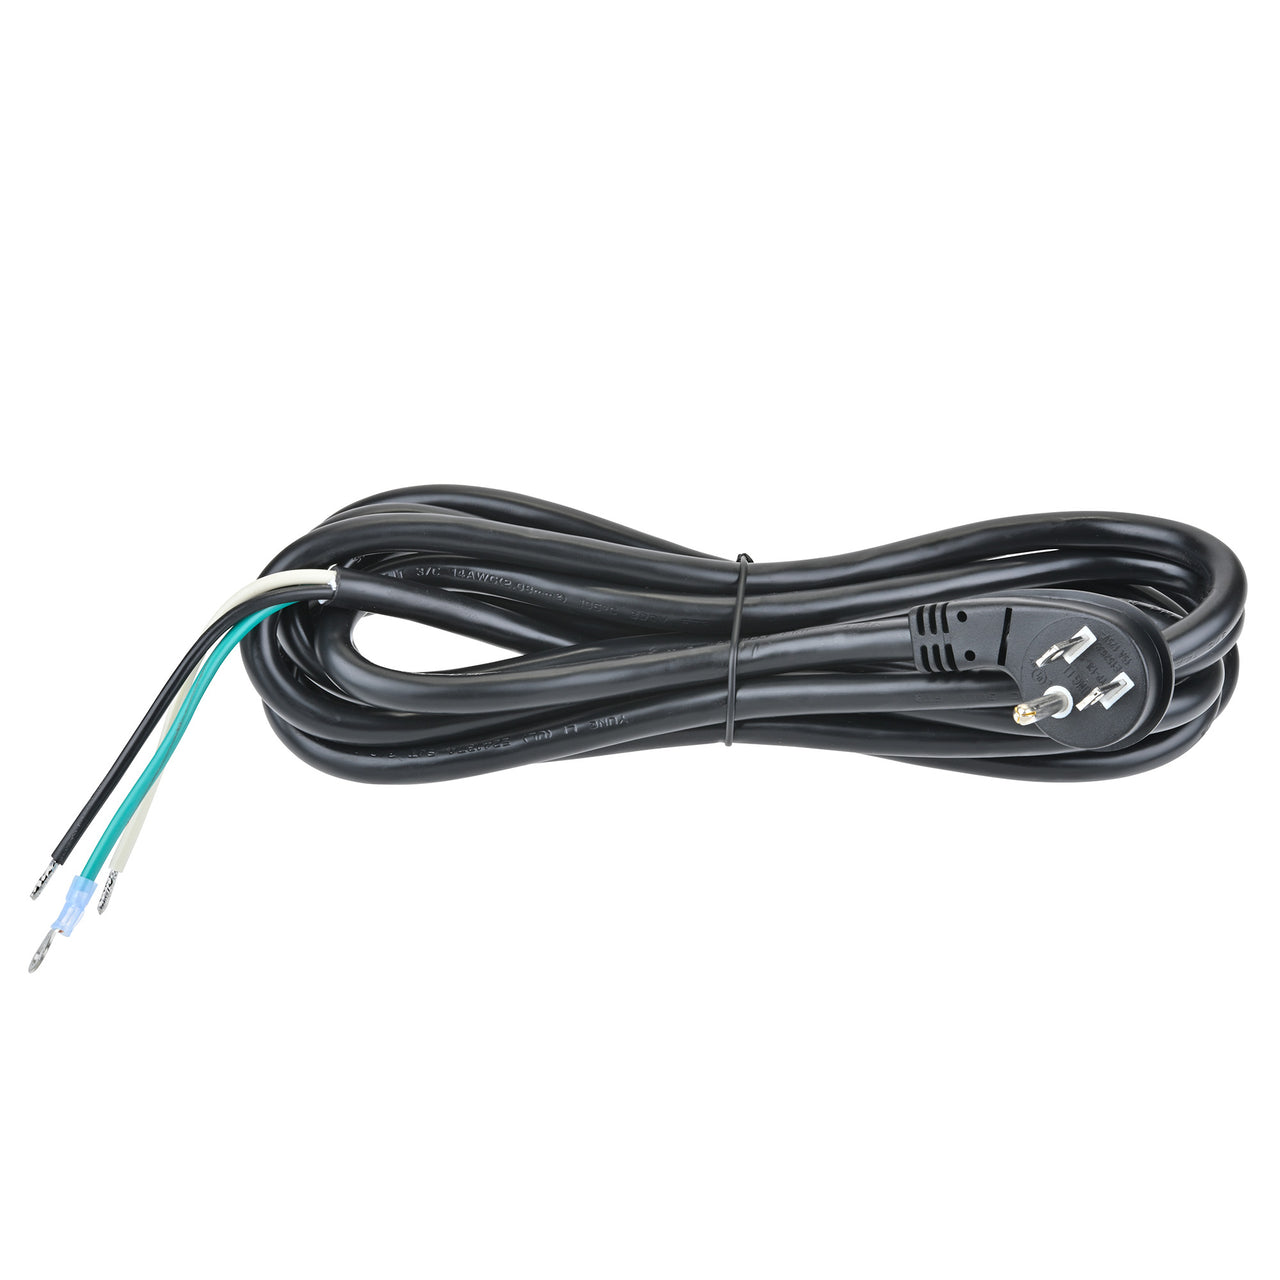 15 amp Hubbell pop up cord kit